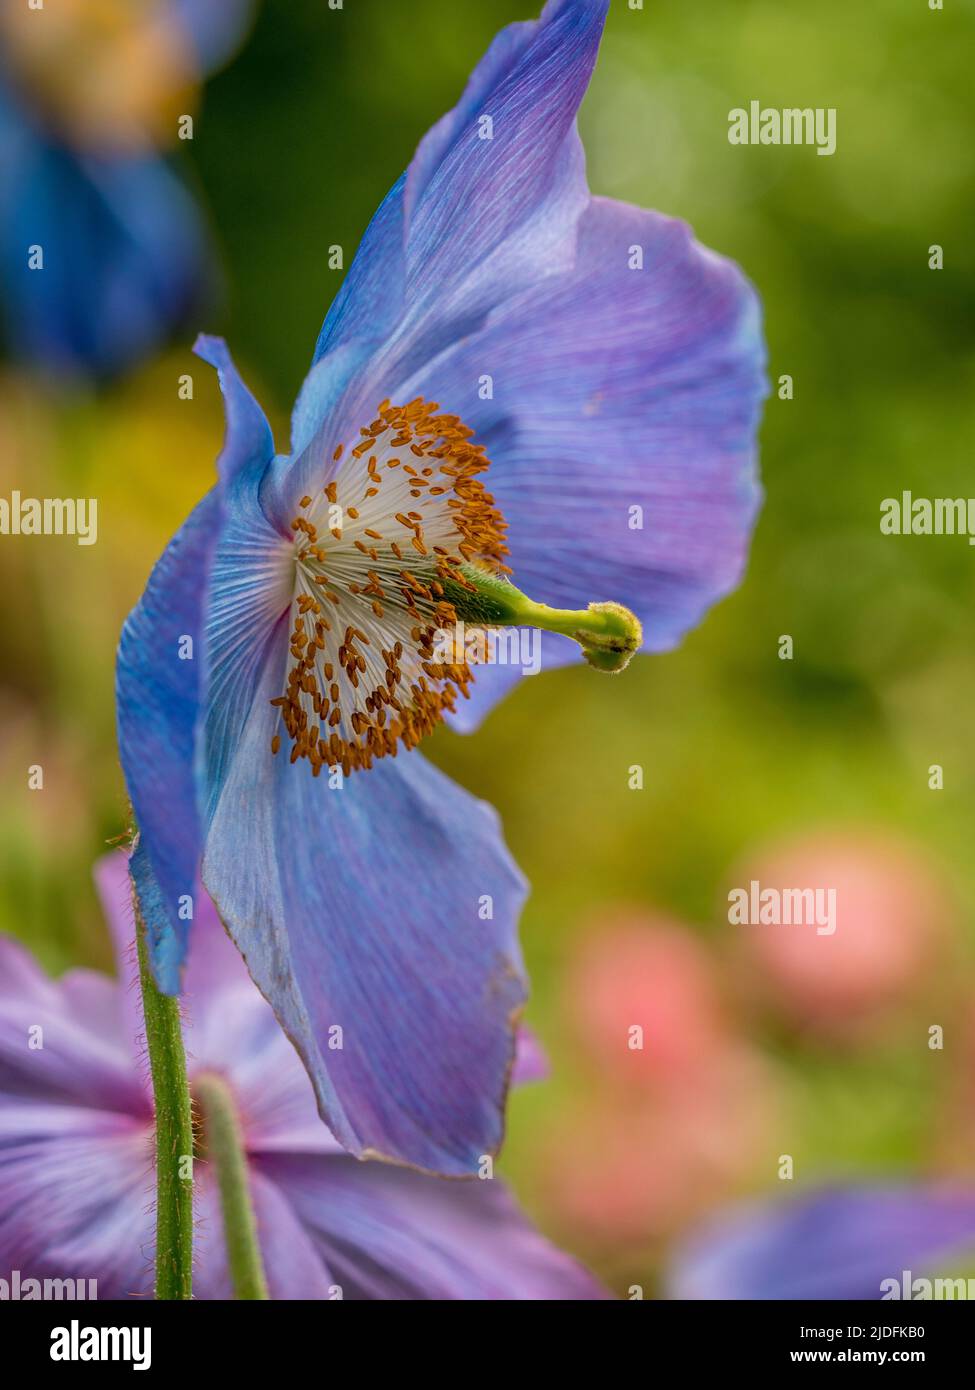 Closeup of a single Meconopsis betonicifolia commonly know as Himalayan blue poppies growing in a UK garden. Stock Photo